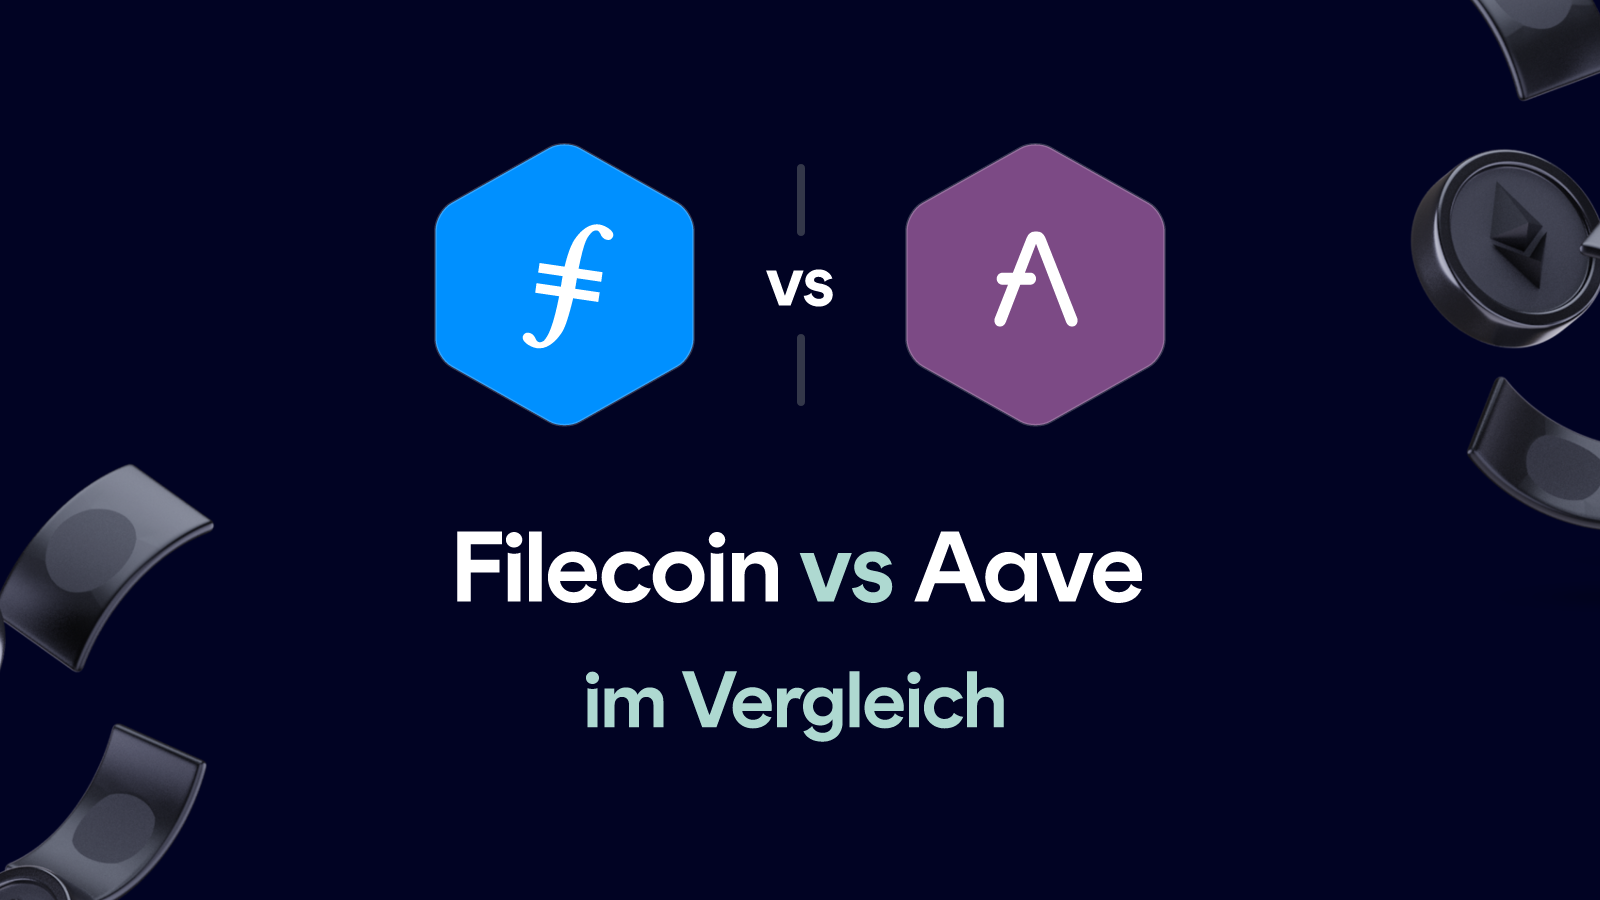 Filecoin vs Aave